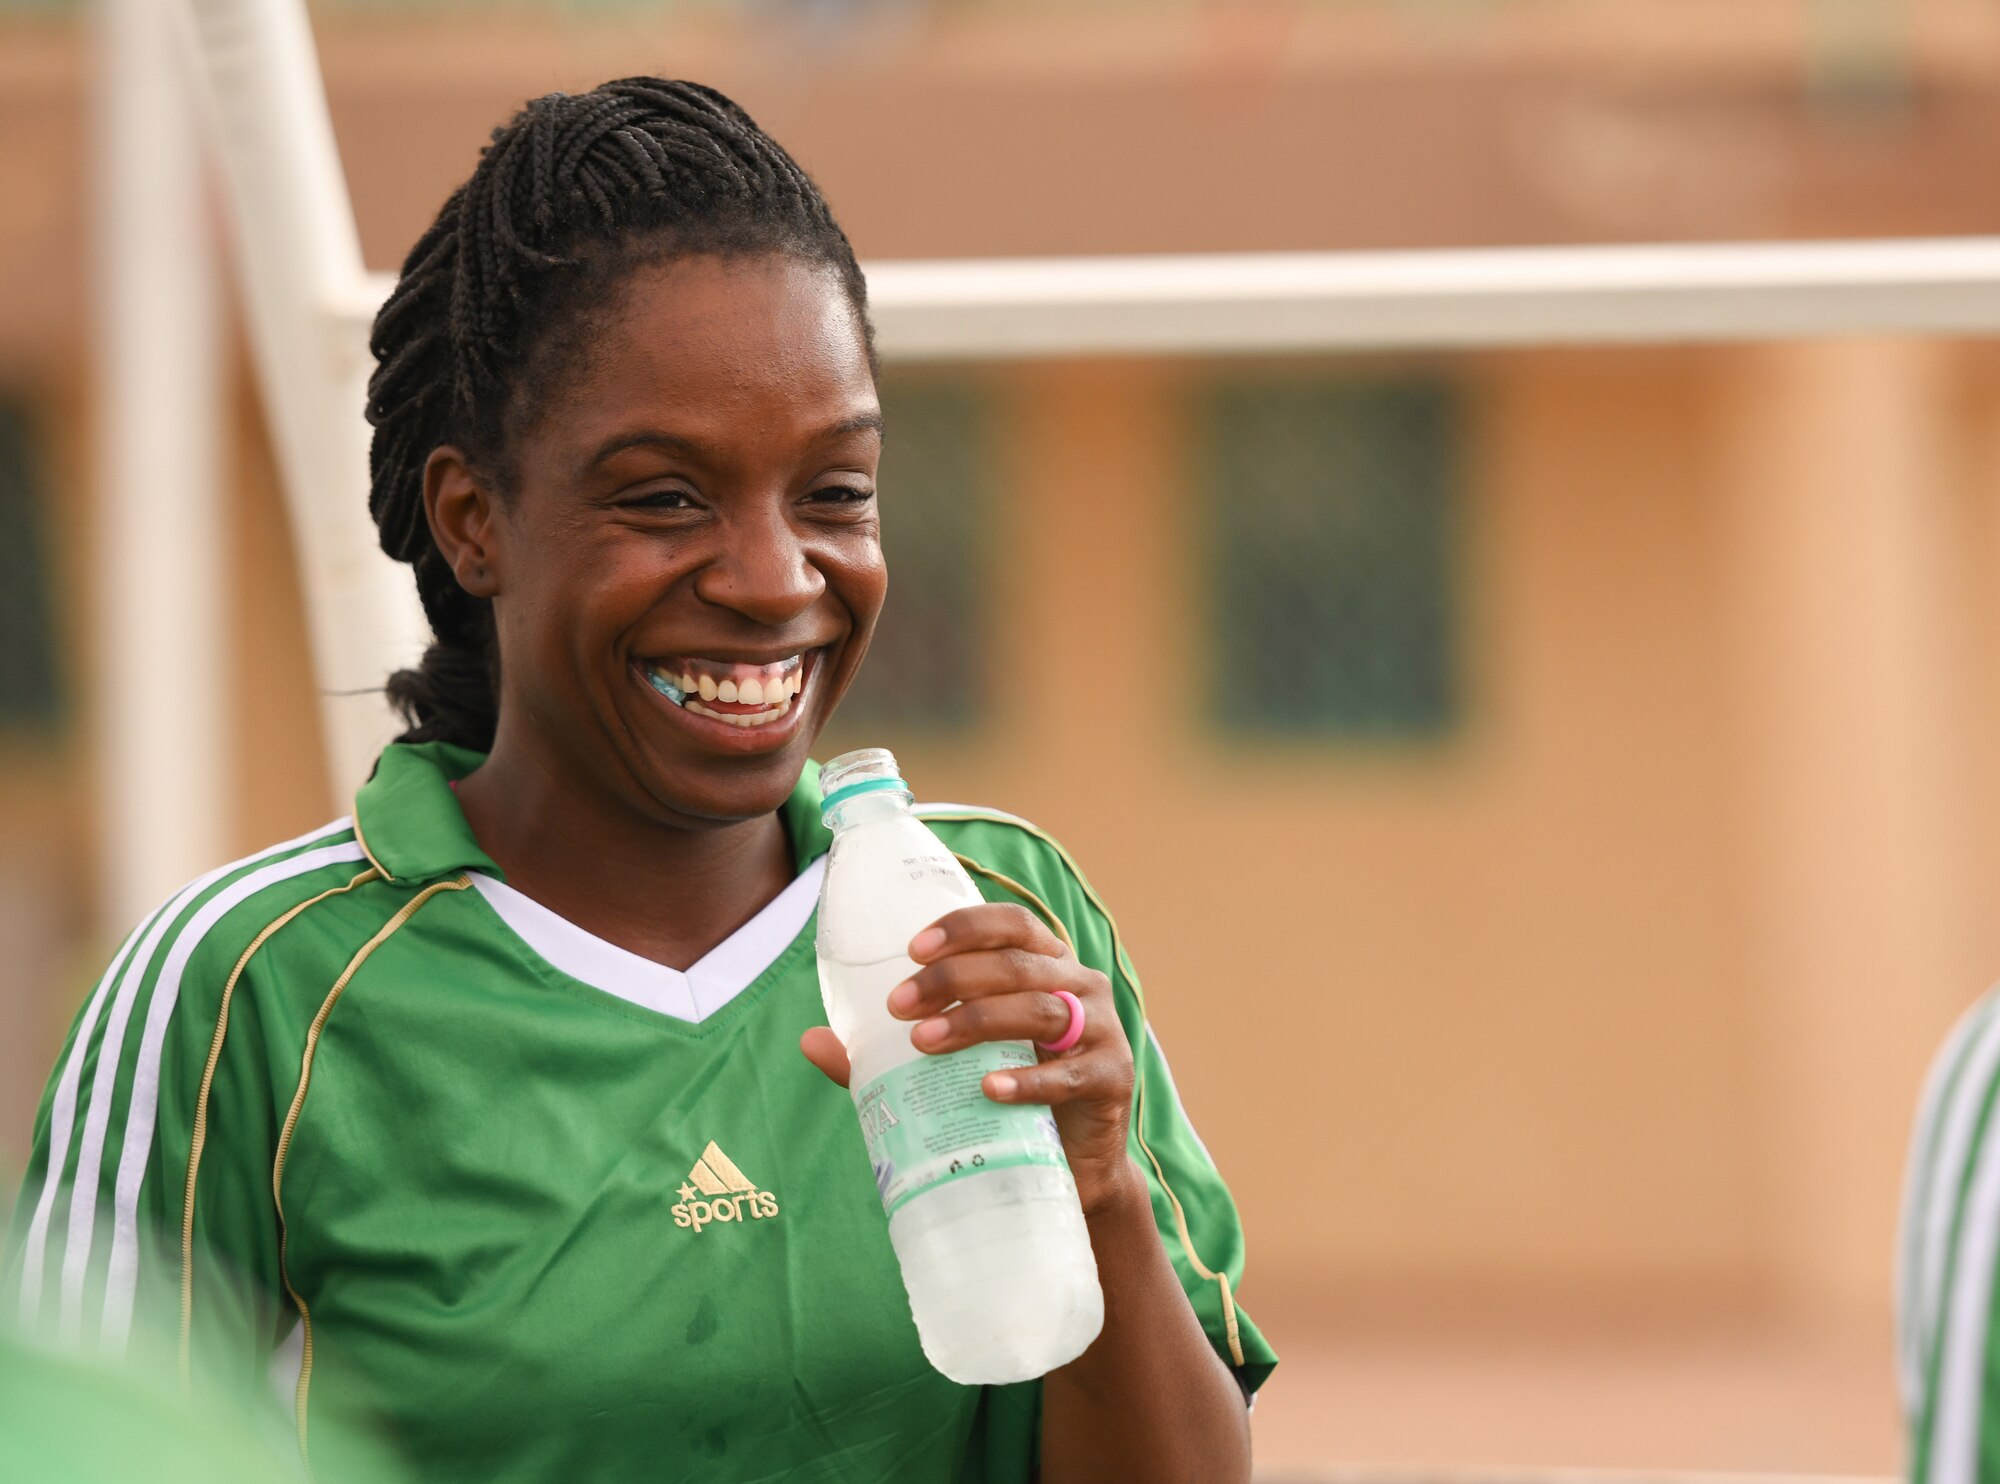 U.S. Air Force Staff Sgt. Chelsie Suggs, 724th Expeditionary Air Base Squadron security forces member, smiles after talking to fellow teammates during a soccer game against the Nassara Athletic Club Women’s Soccer Team at the Agadez Sports Stadium in Agadez, Niger, July 5, 2019. The civil affairs team held the game to build rapport and promote positive sentiment between the local community and Nigerien Air Base 201 personnel. (U.S. Air Force photo by Senior Airman Lexie West)